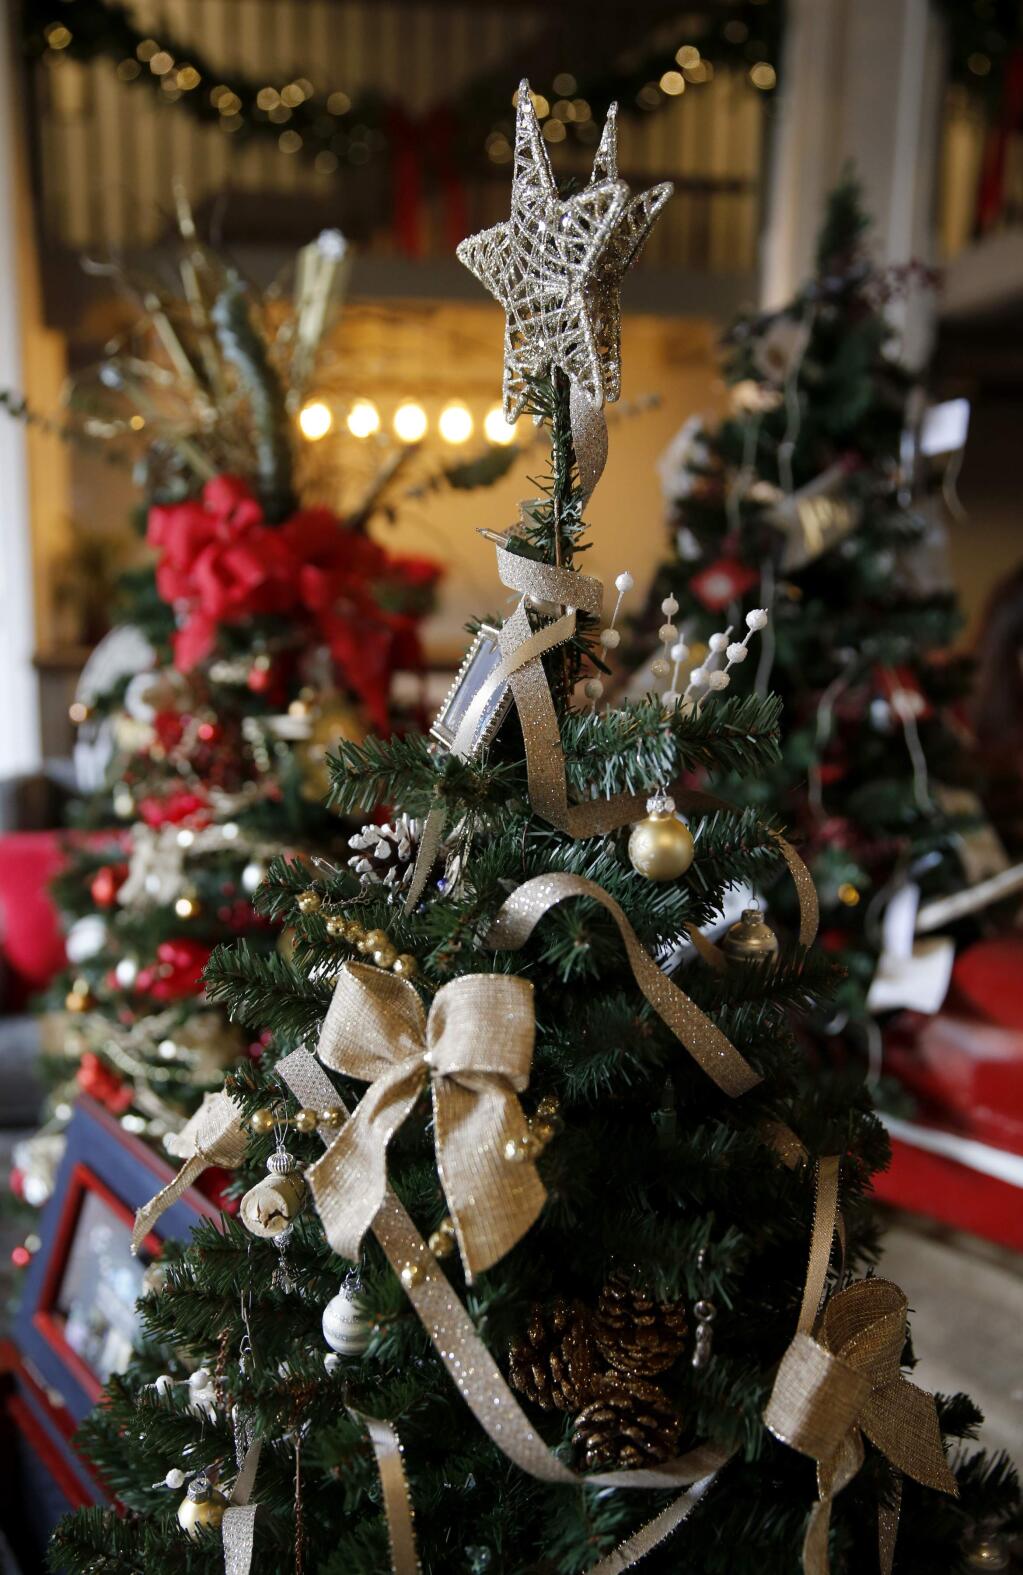 Decorated Christmas trees will be auctioned off for charity during the annual Festival of Trees event organized by the nonprofit Fabulous Women of Sonoma County. Photo taken in the lobby of Hotel Petaluma in Petaluma, on Wednesday, November 22, 2017. (BETH SCHLANKER/ The Press Democrat)